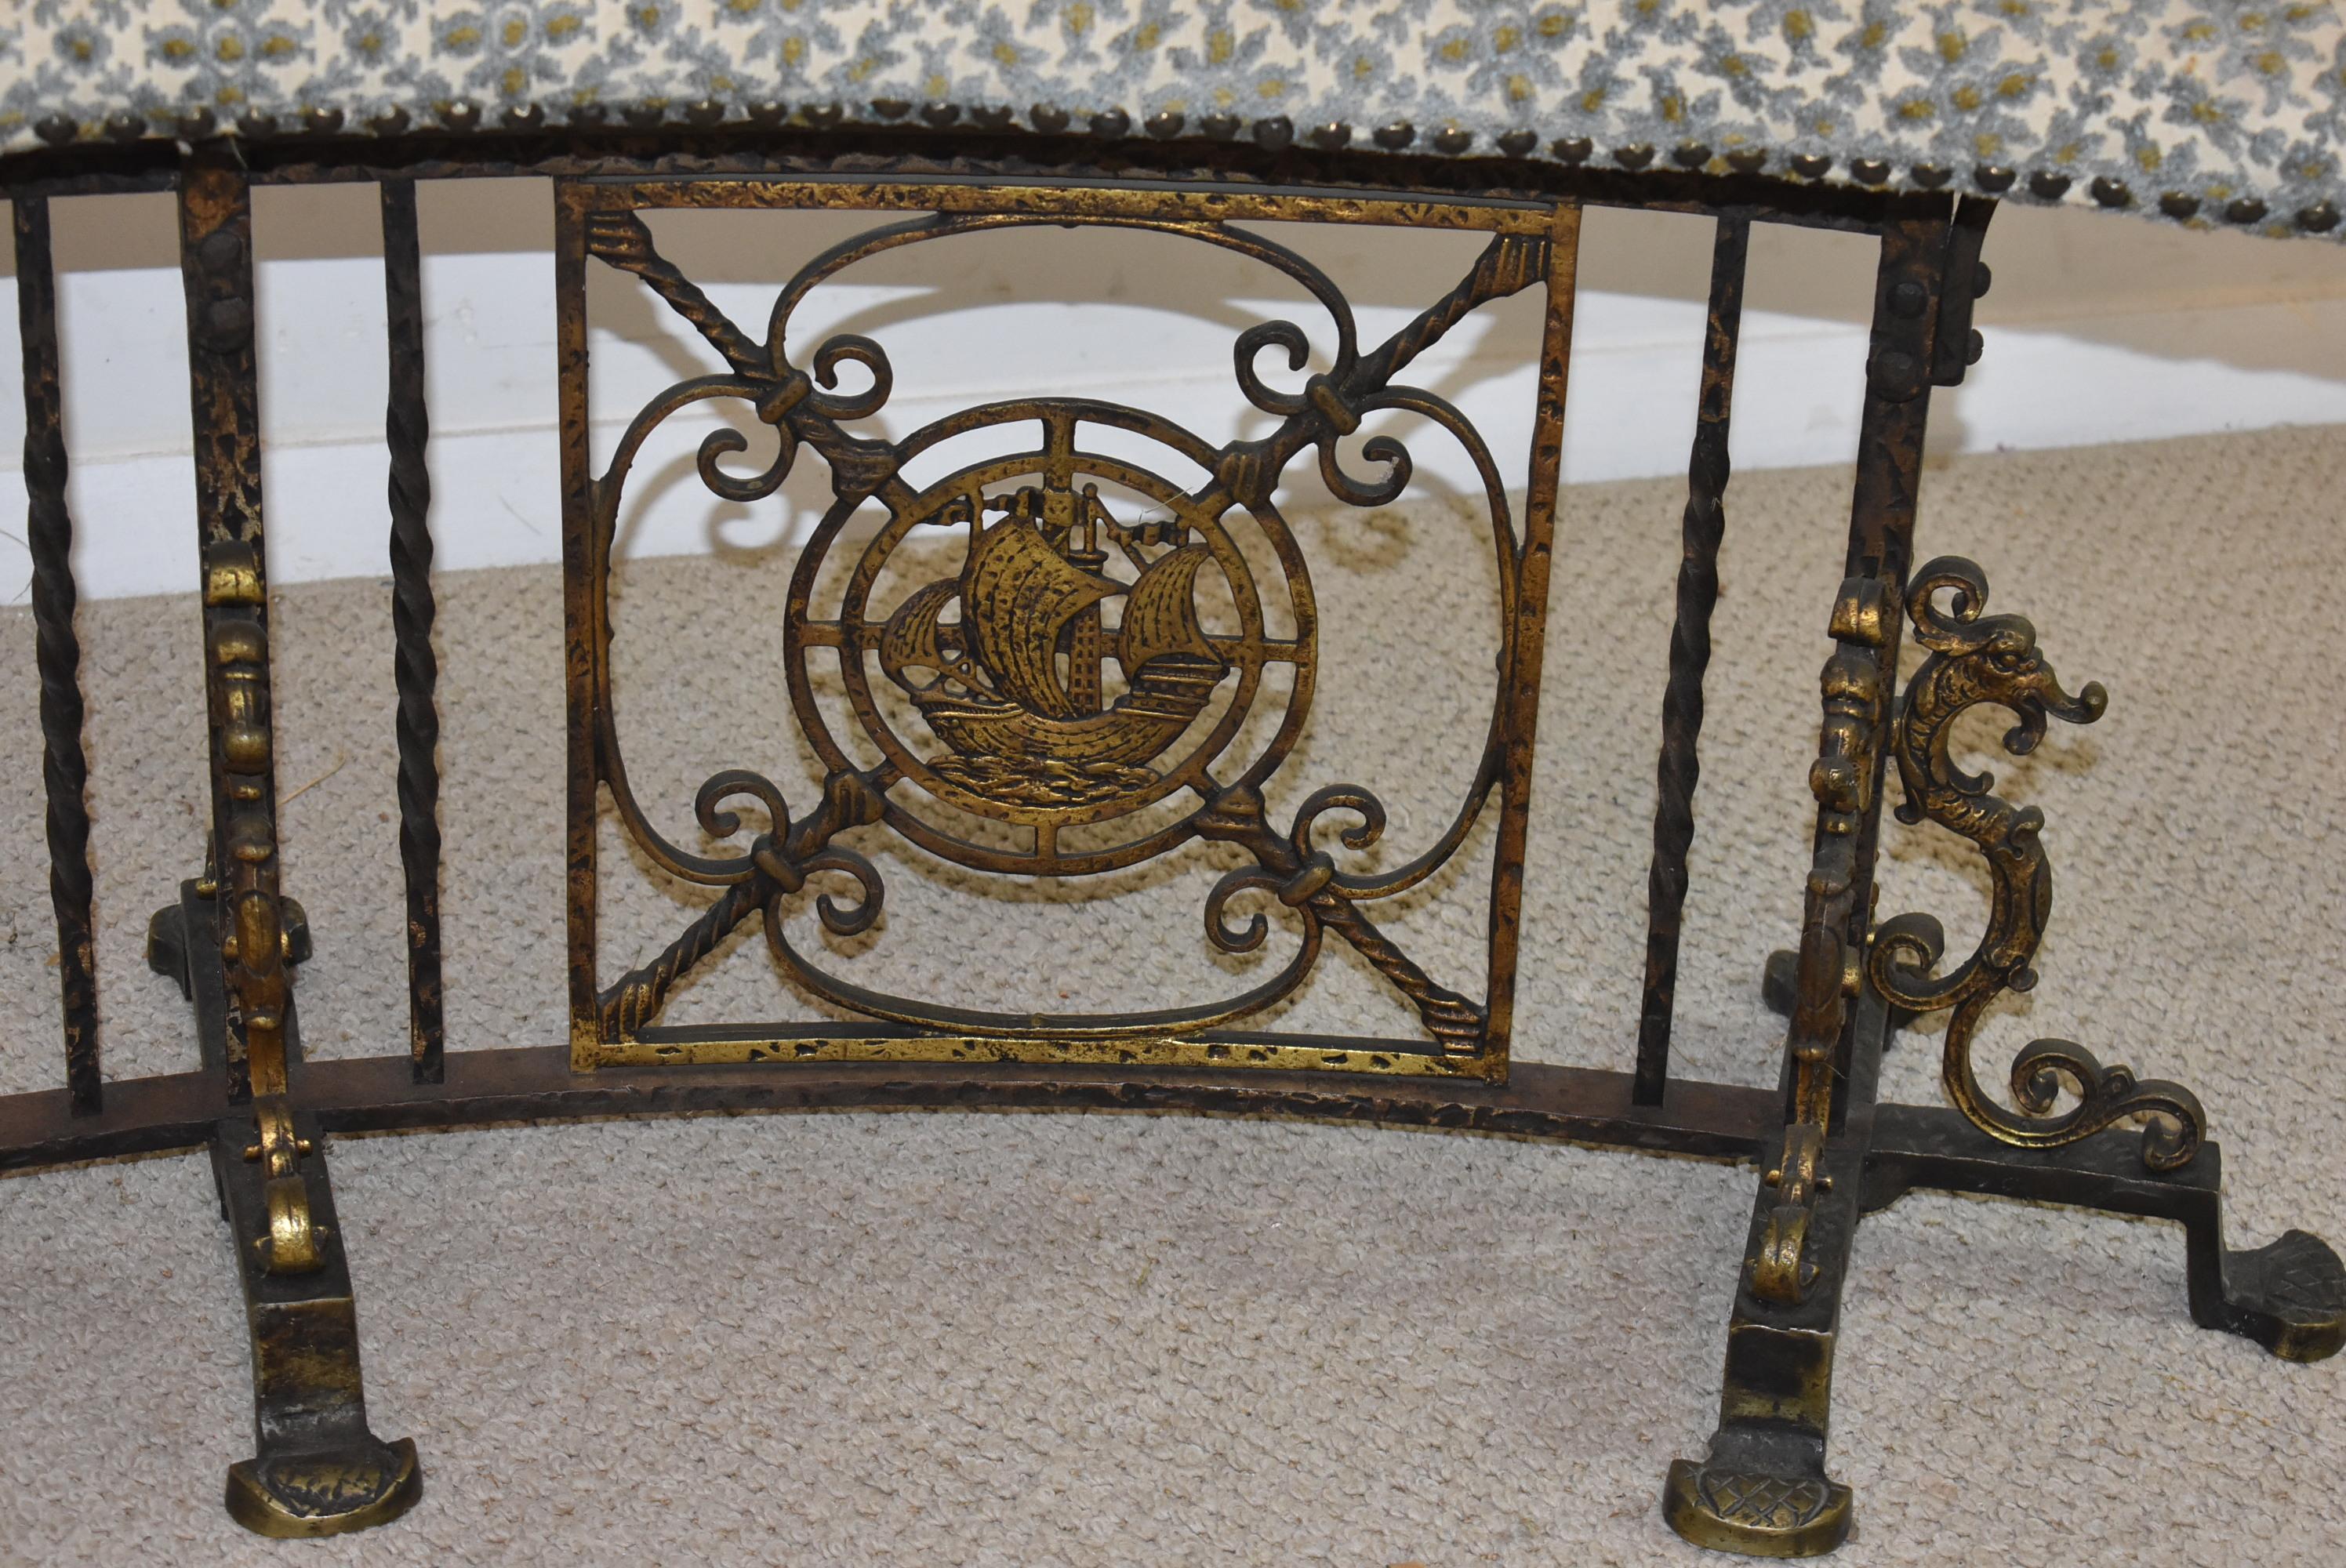 Hammered Curved Iron Upholstered Bench Attributed to Oscar Bach Ship & Seahorse Details